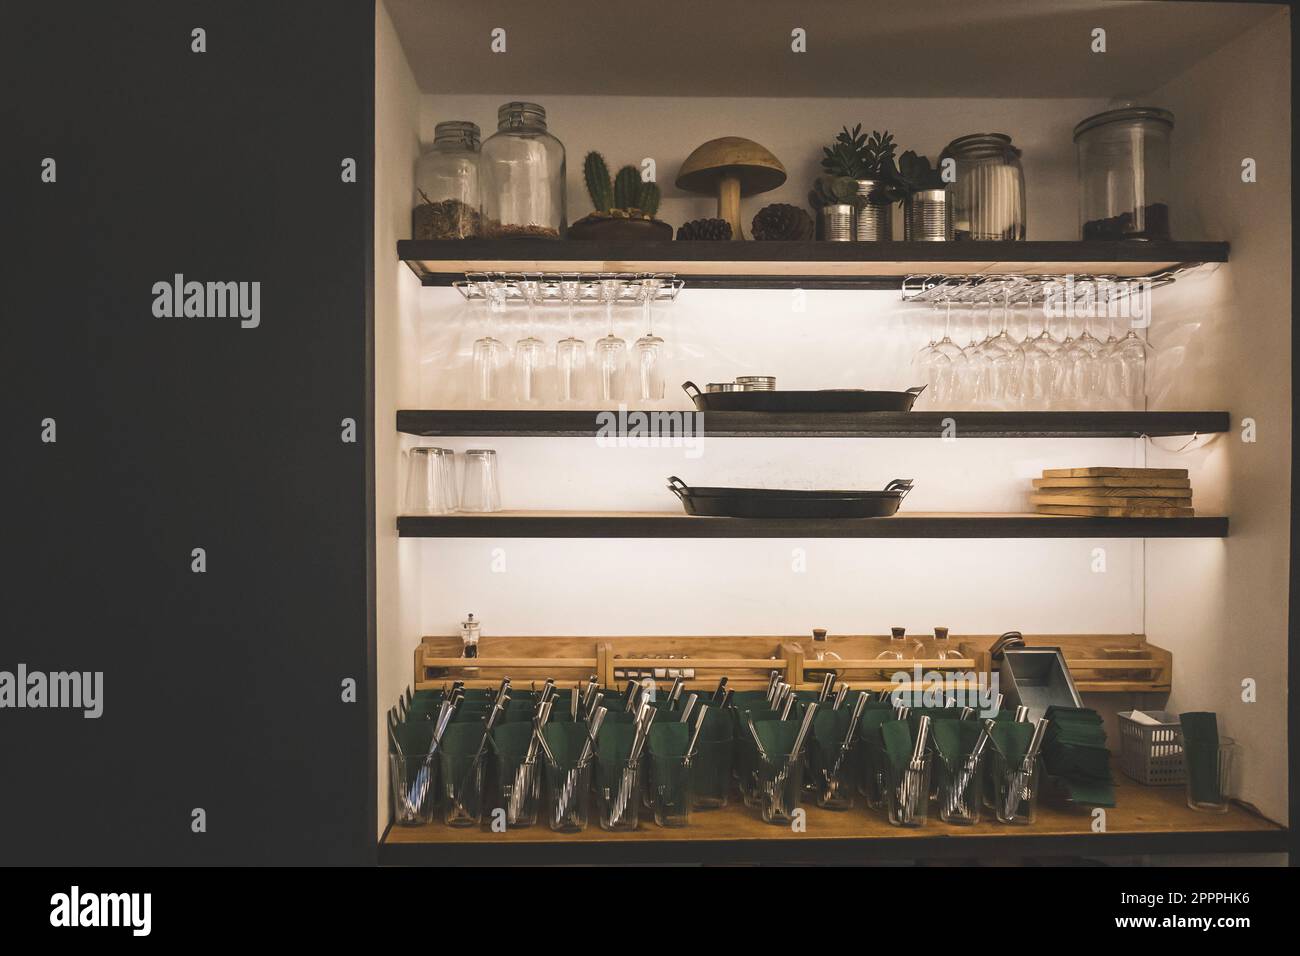 Set of utensils, glass wines and containers arranged on a wall wooden shelves in cafe or restaurant Stock Photo